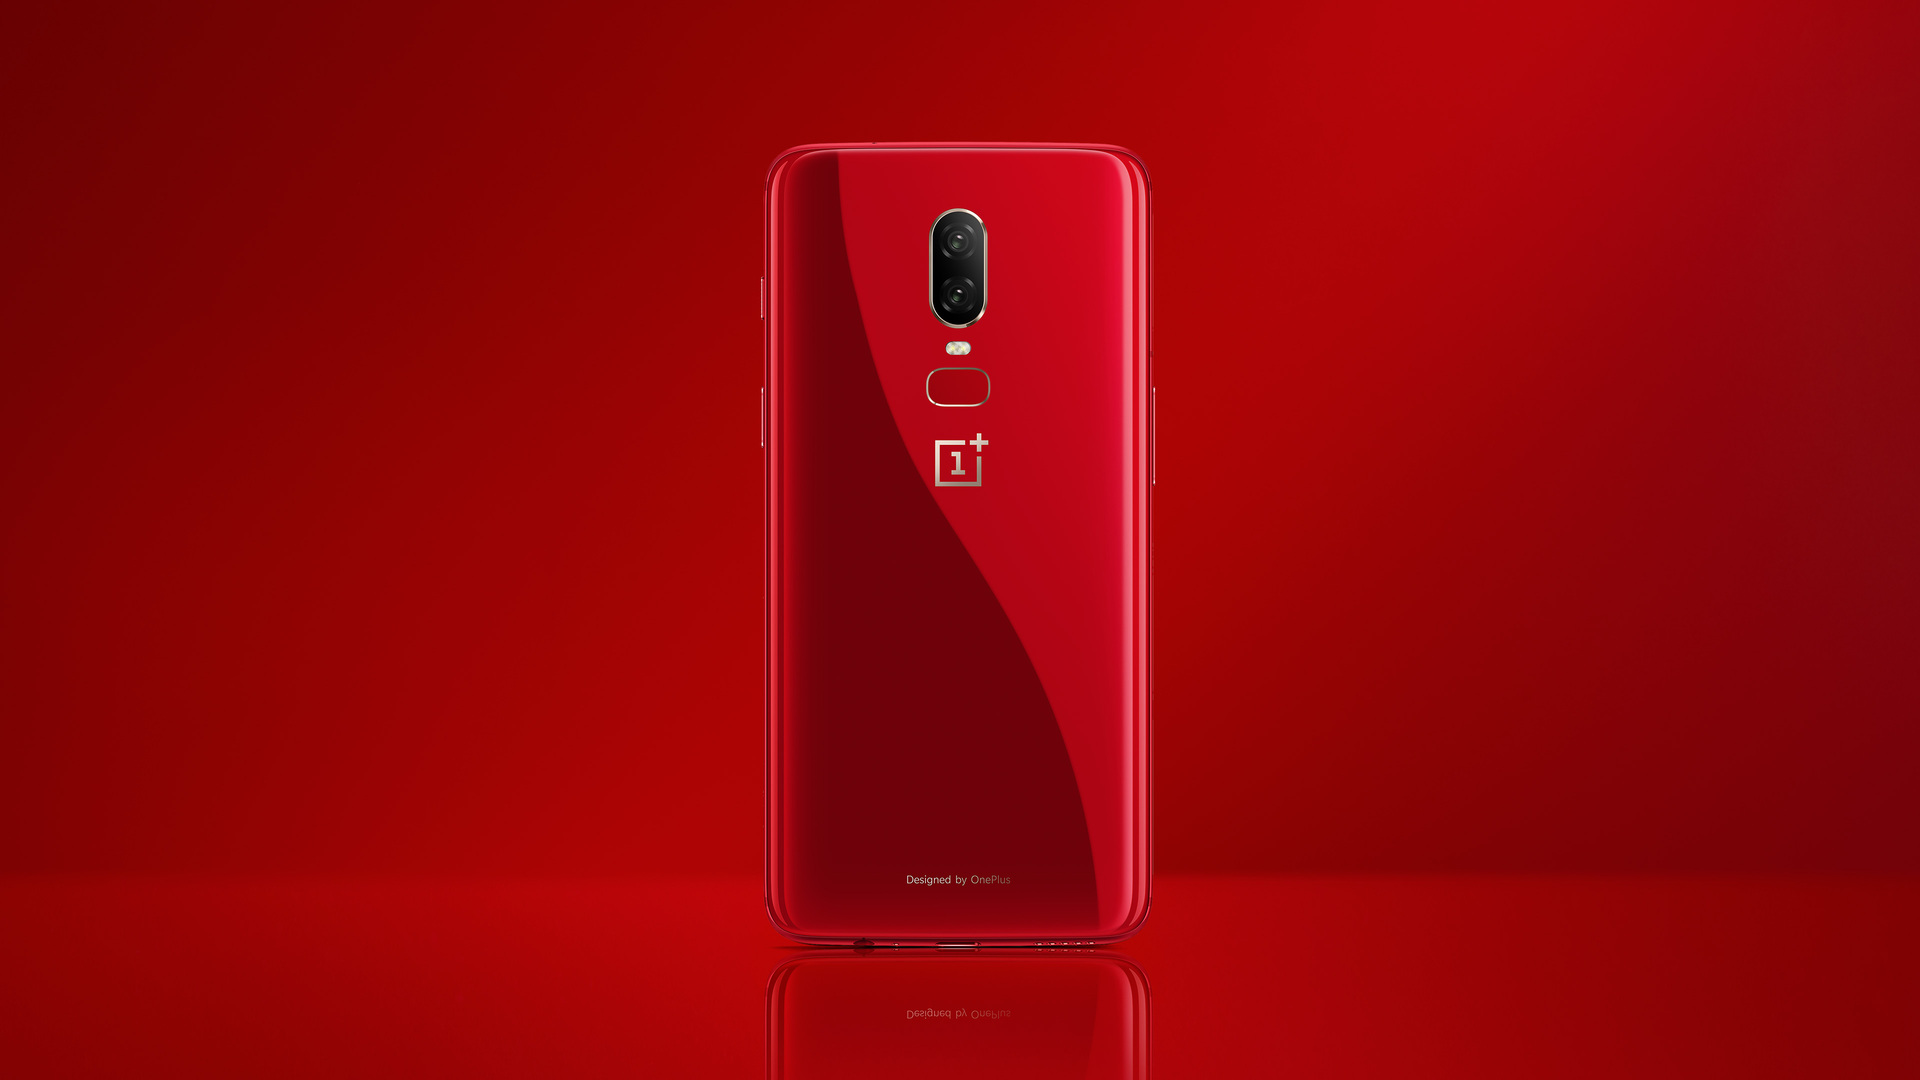 OxygenOS 10.3.1 Update And Optimized Charging Feature Out for OnePlus 6/6T